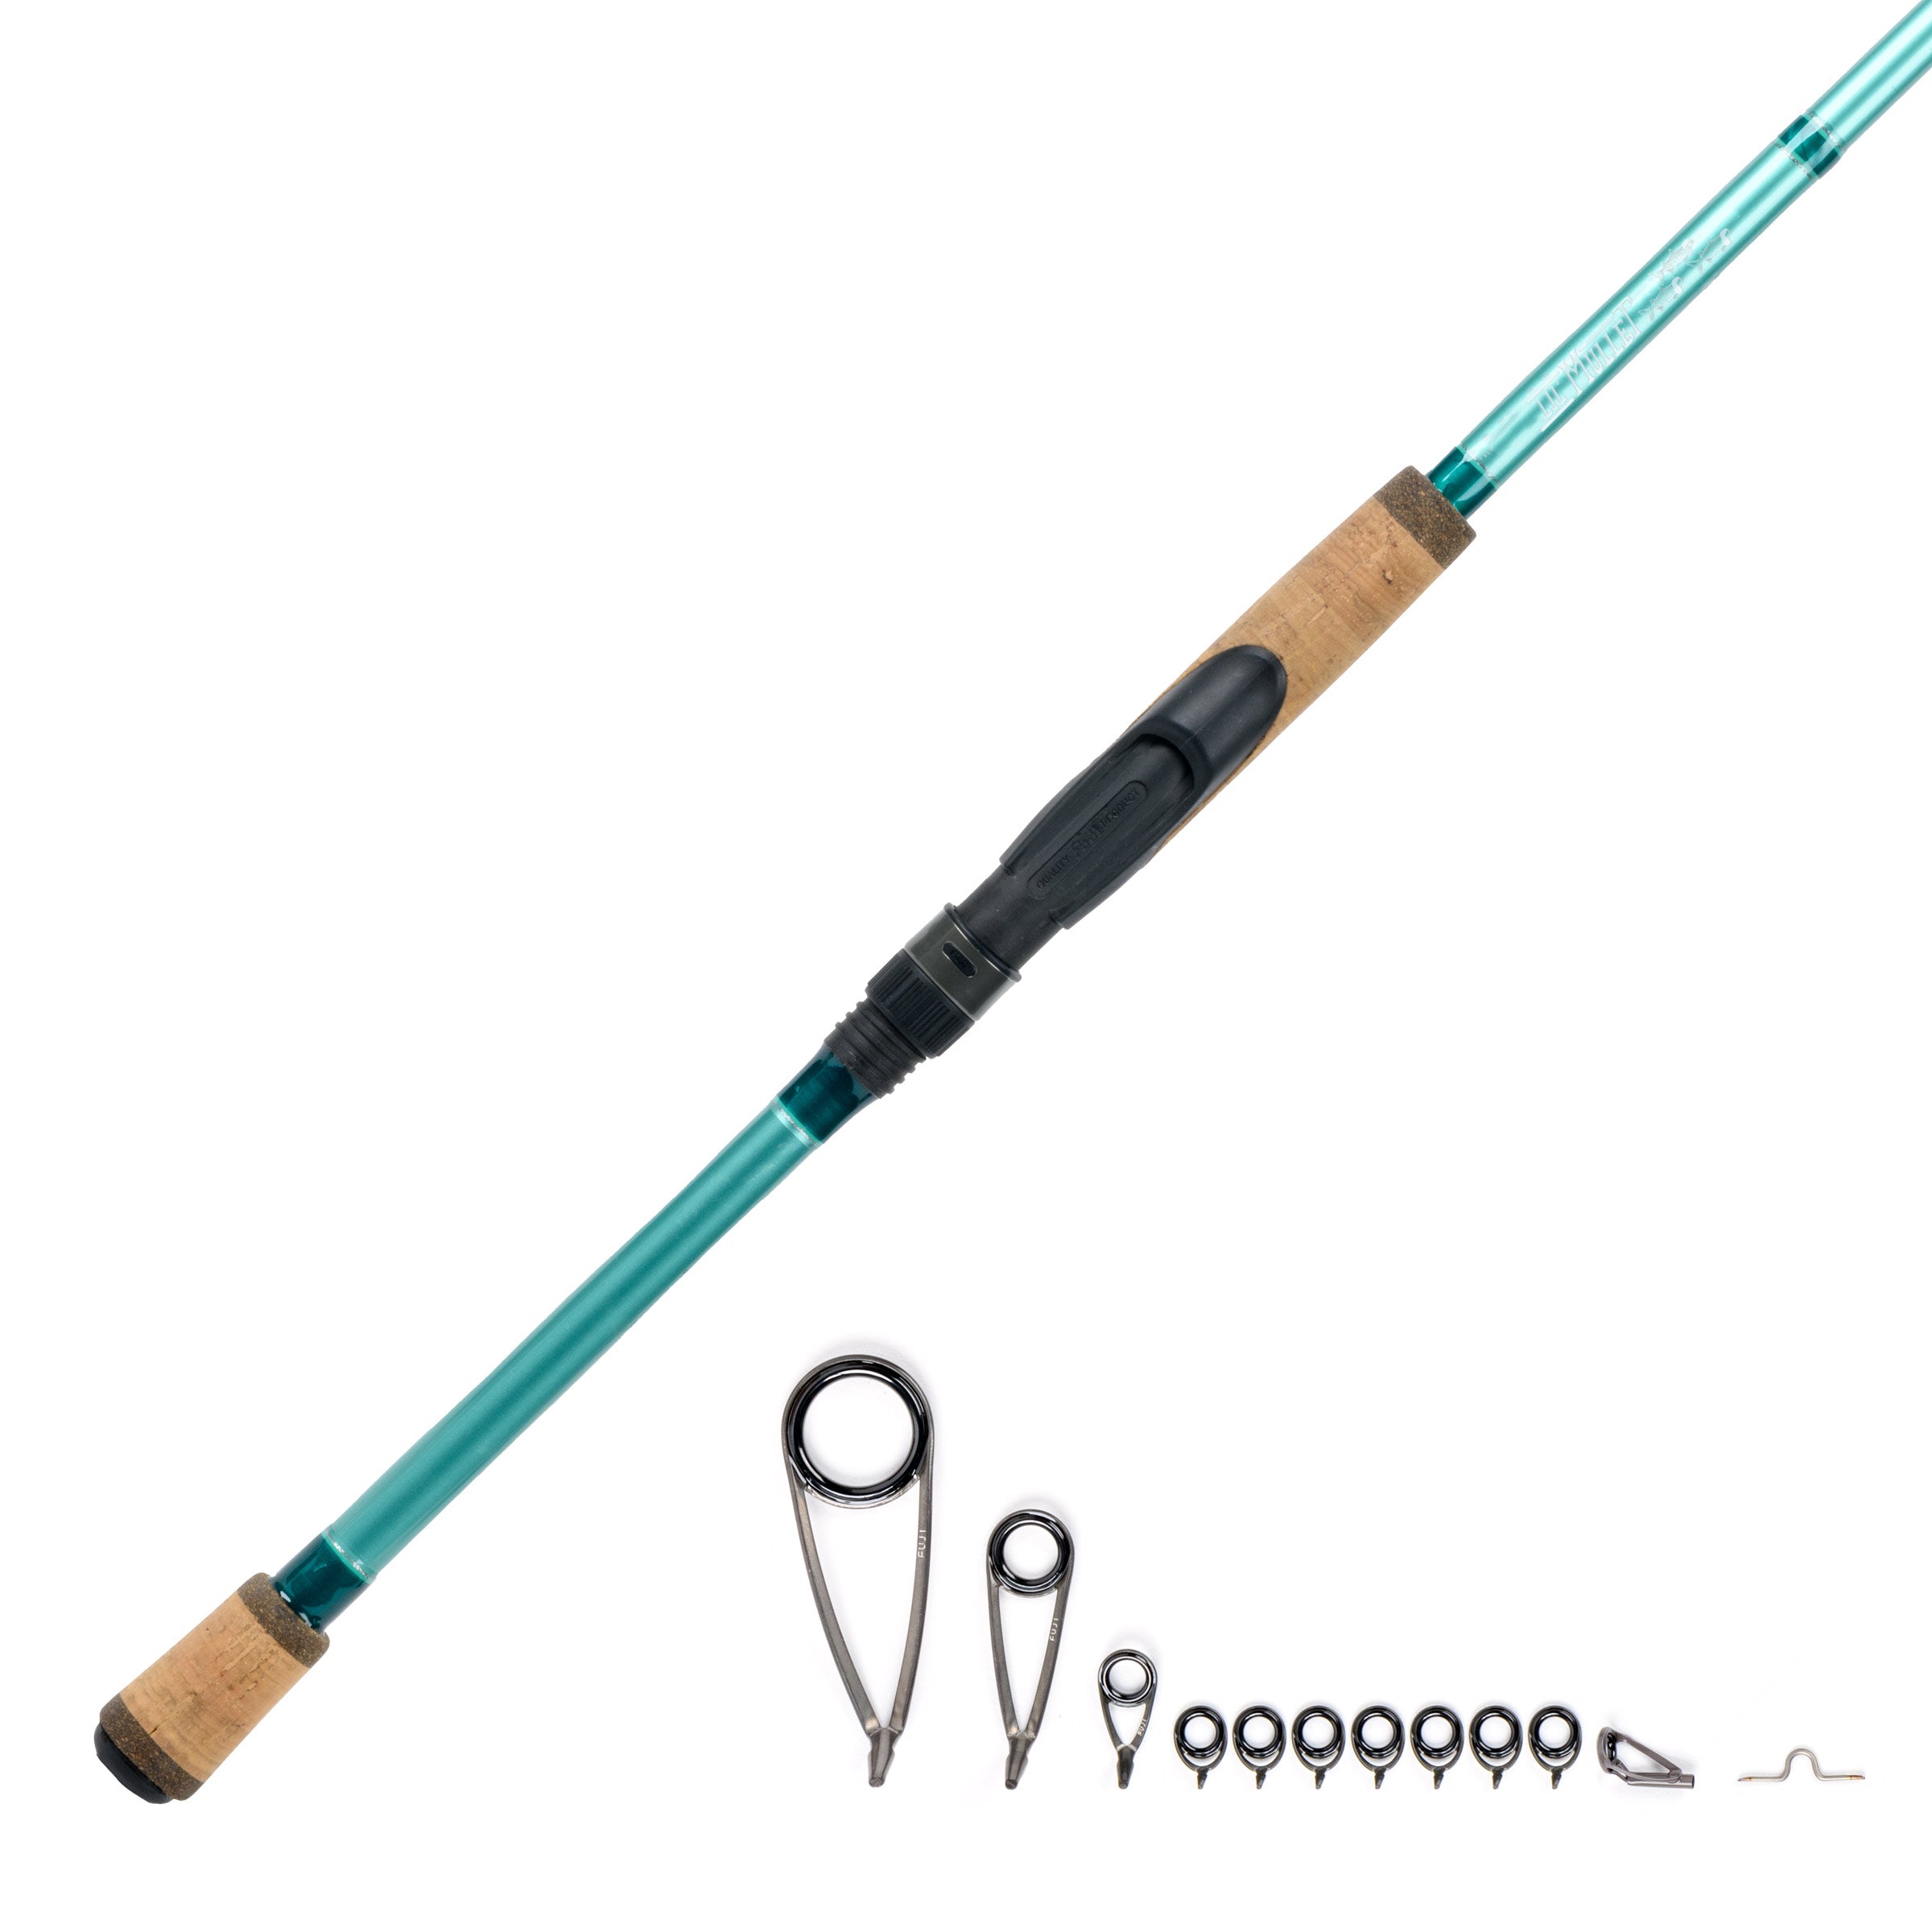 Jake’s Lil Mullet 7’6” Med-Heavy All Around Inshore Fishing Rod Component Kit